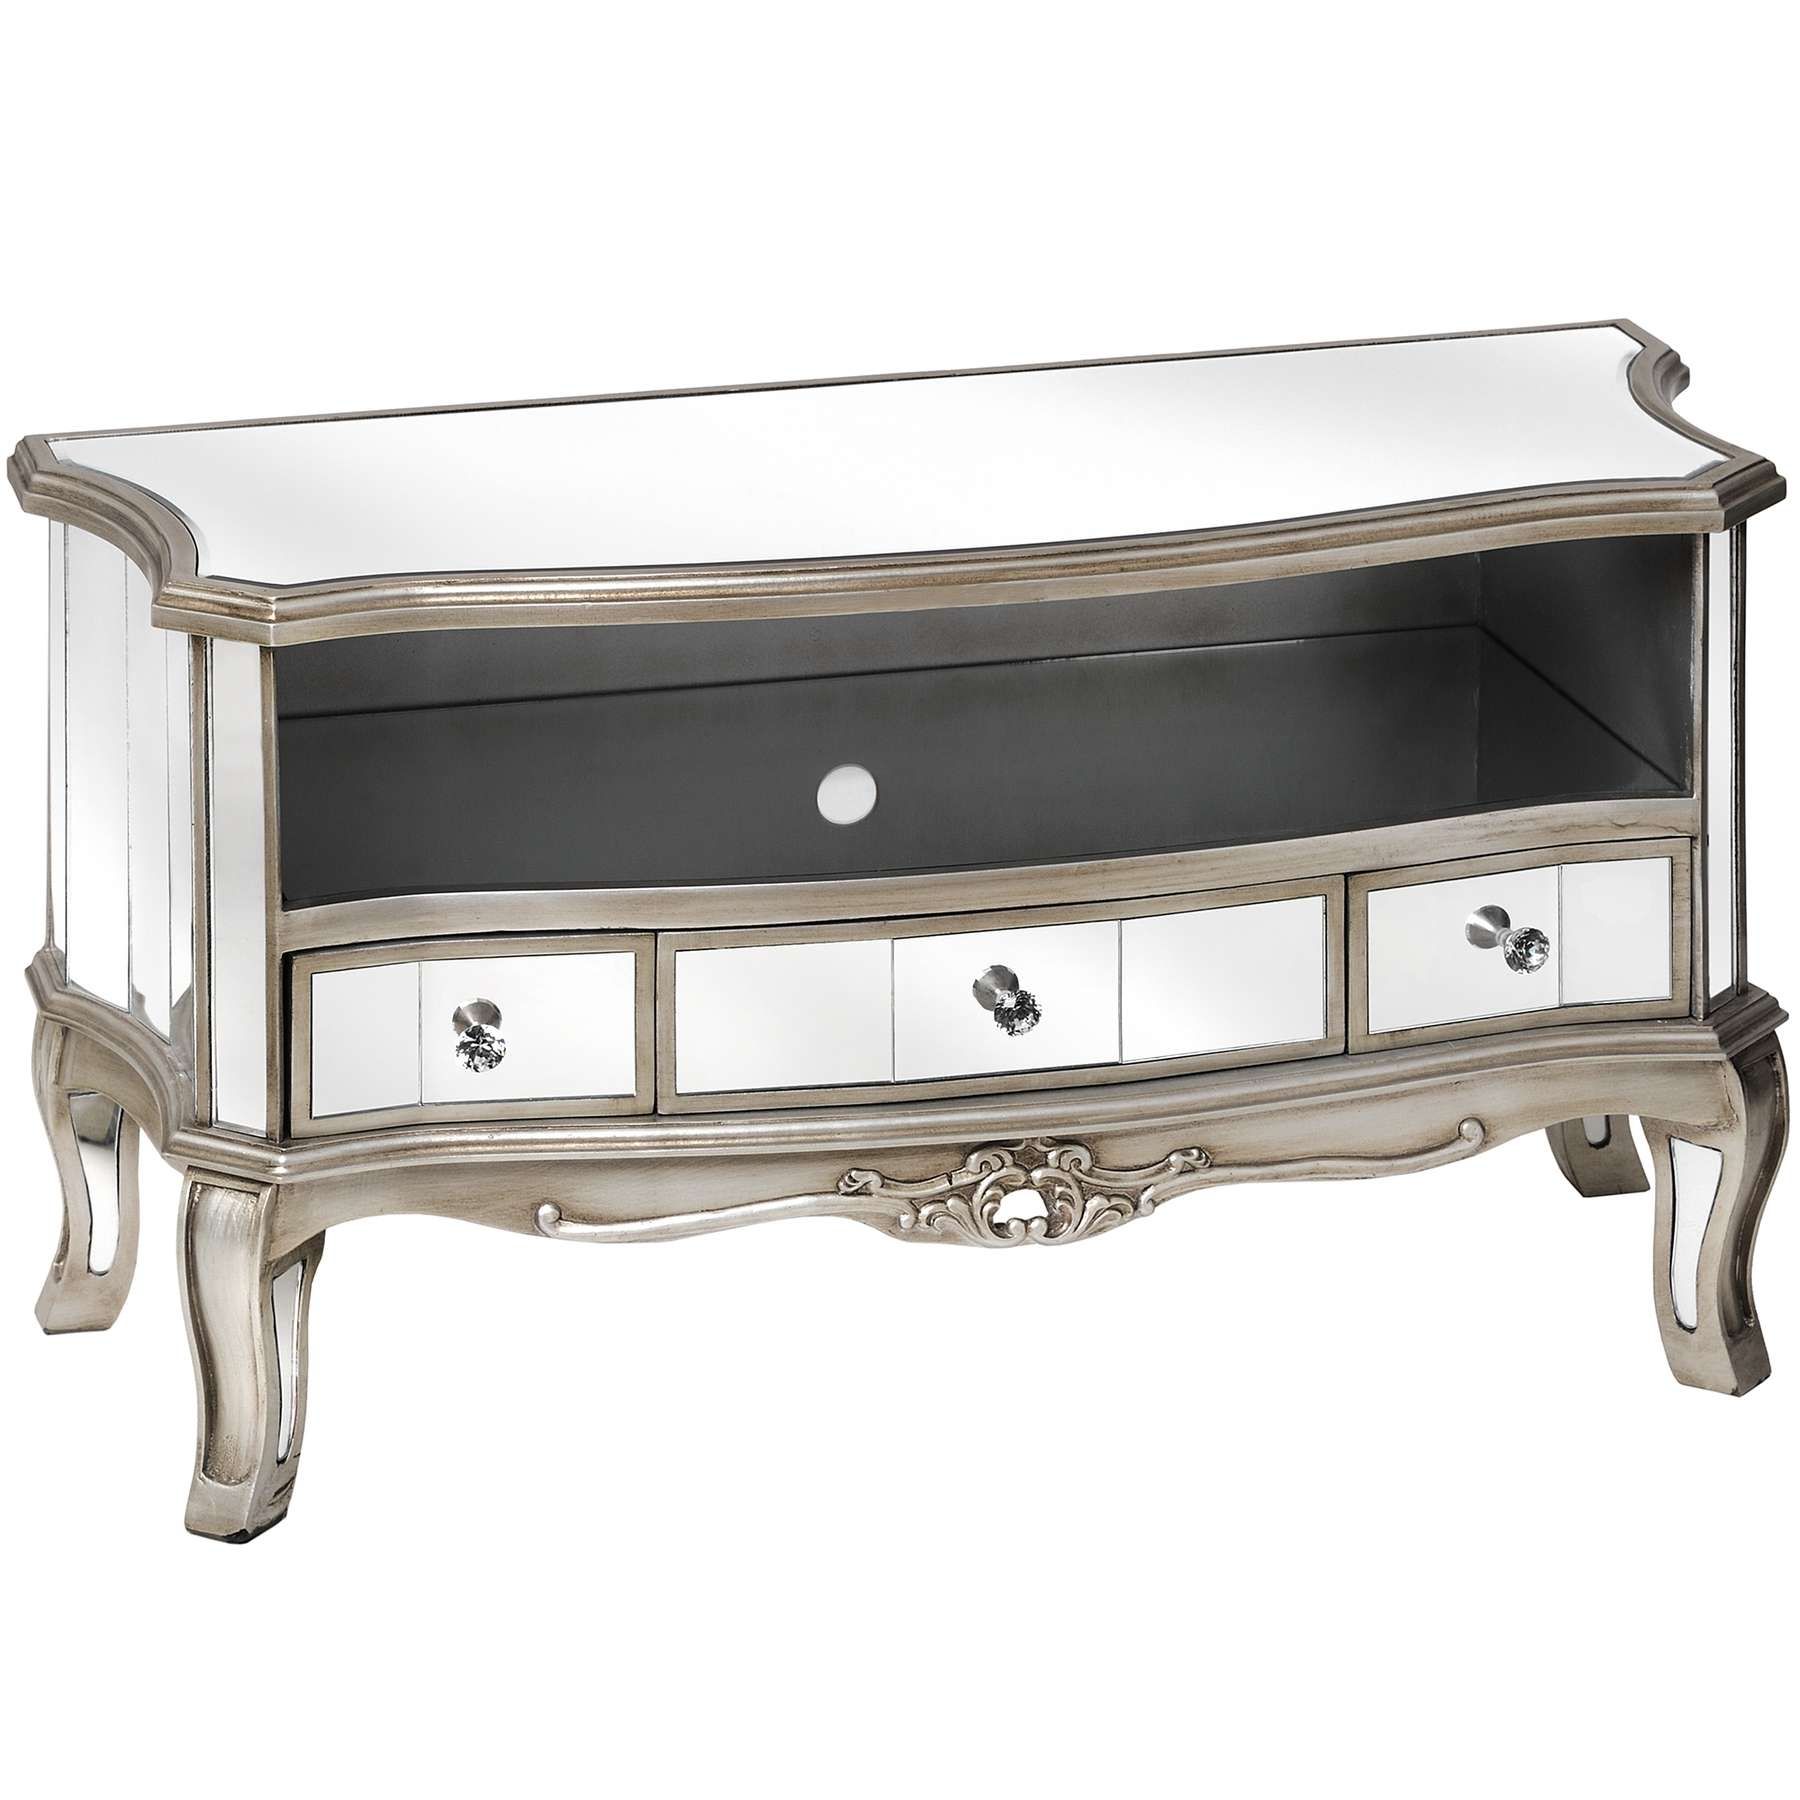 Argente Mirrored Television Cabinet | From Baytree Interiors For Mirrored Tv Stands (View 14 of 15)